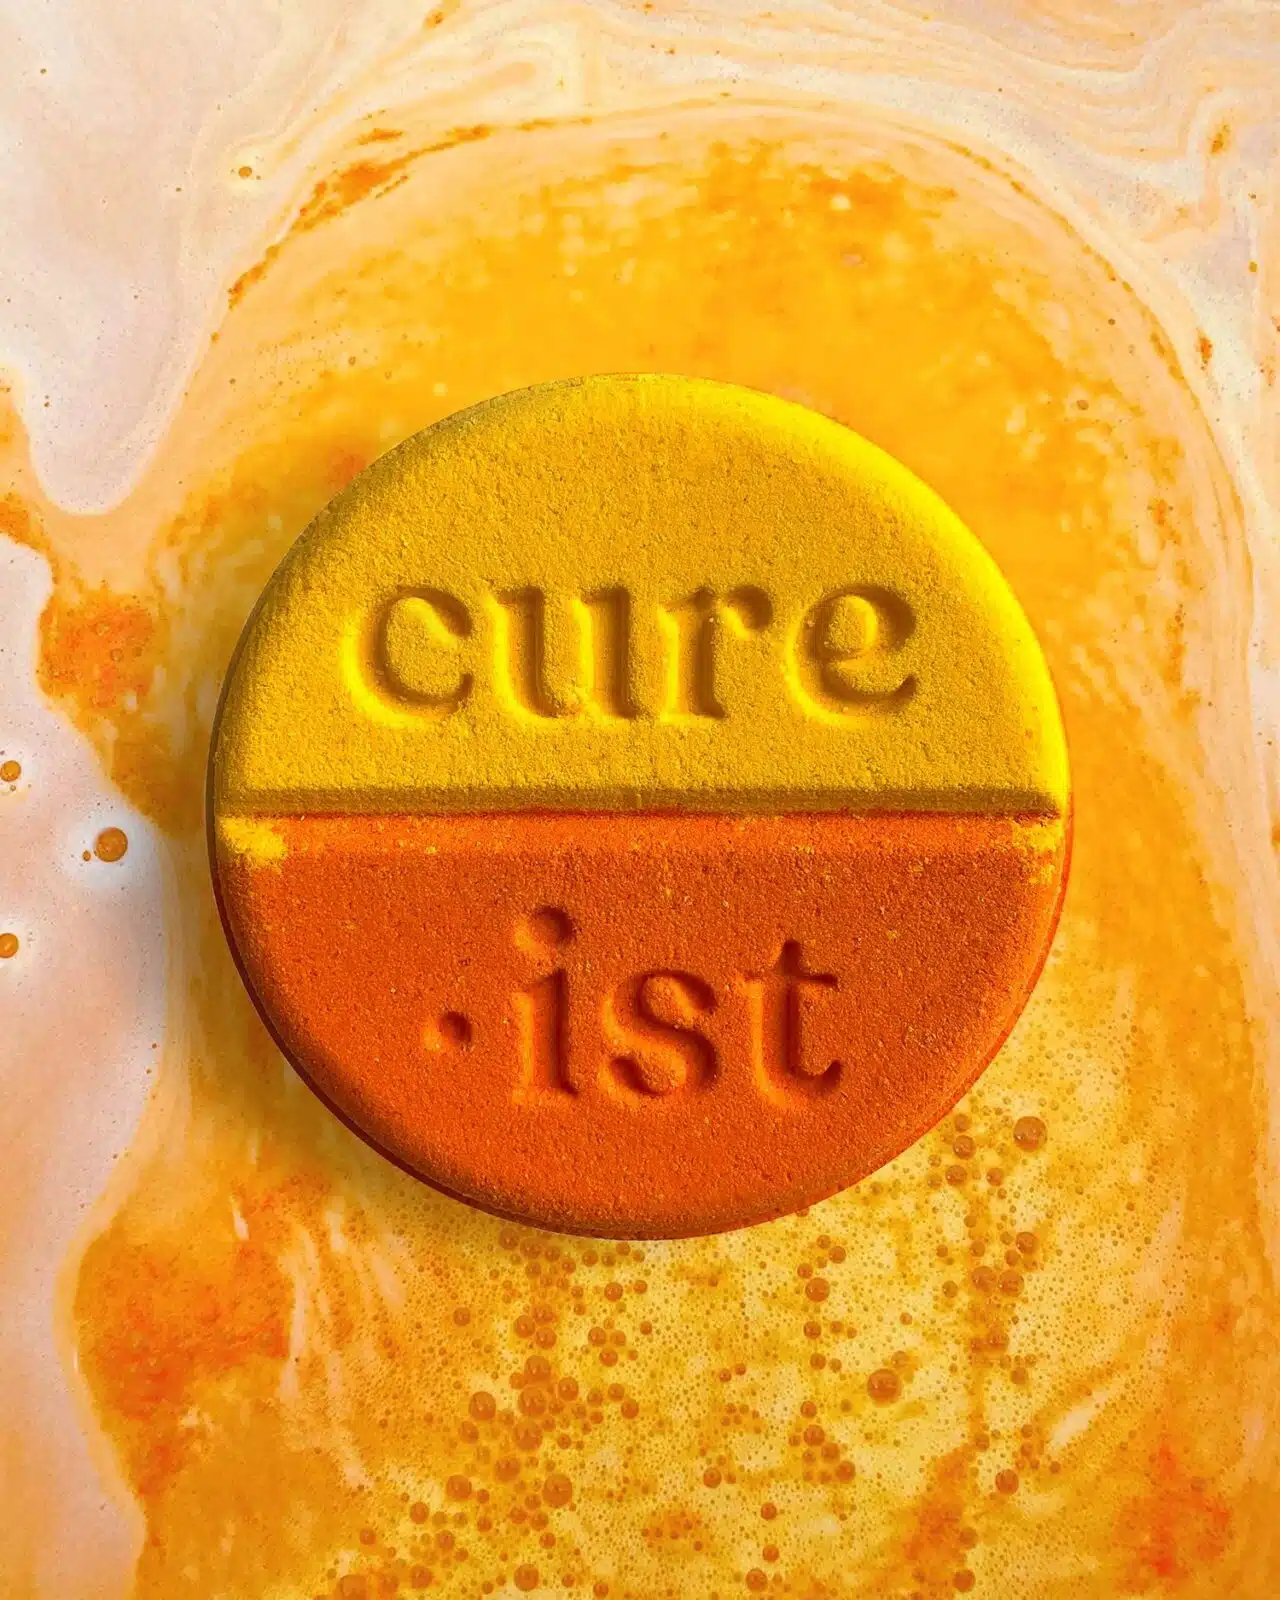 The first ever bath bomb prescription made for Millennials From The Cure•ist